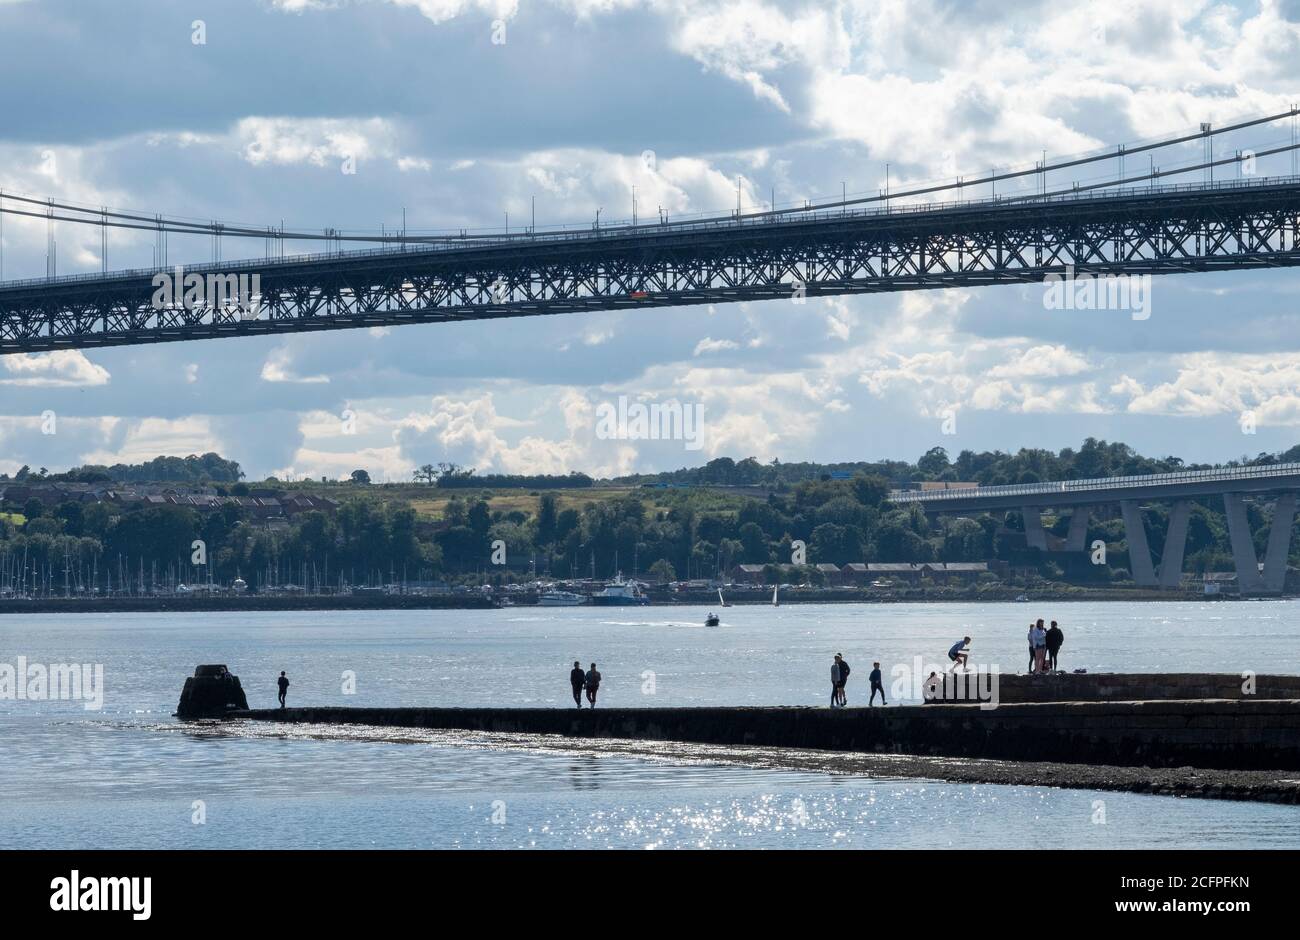 The pier and slipway at North Queensferry, Fife, Scotland. Stock Photo